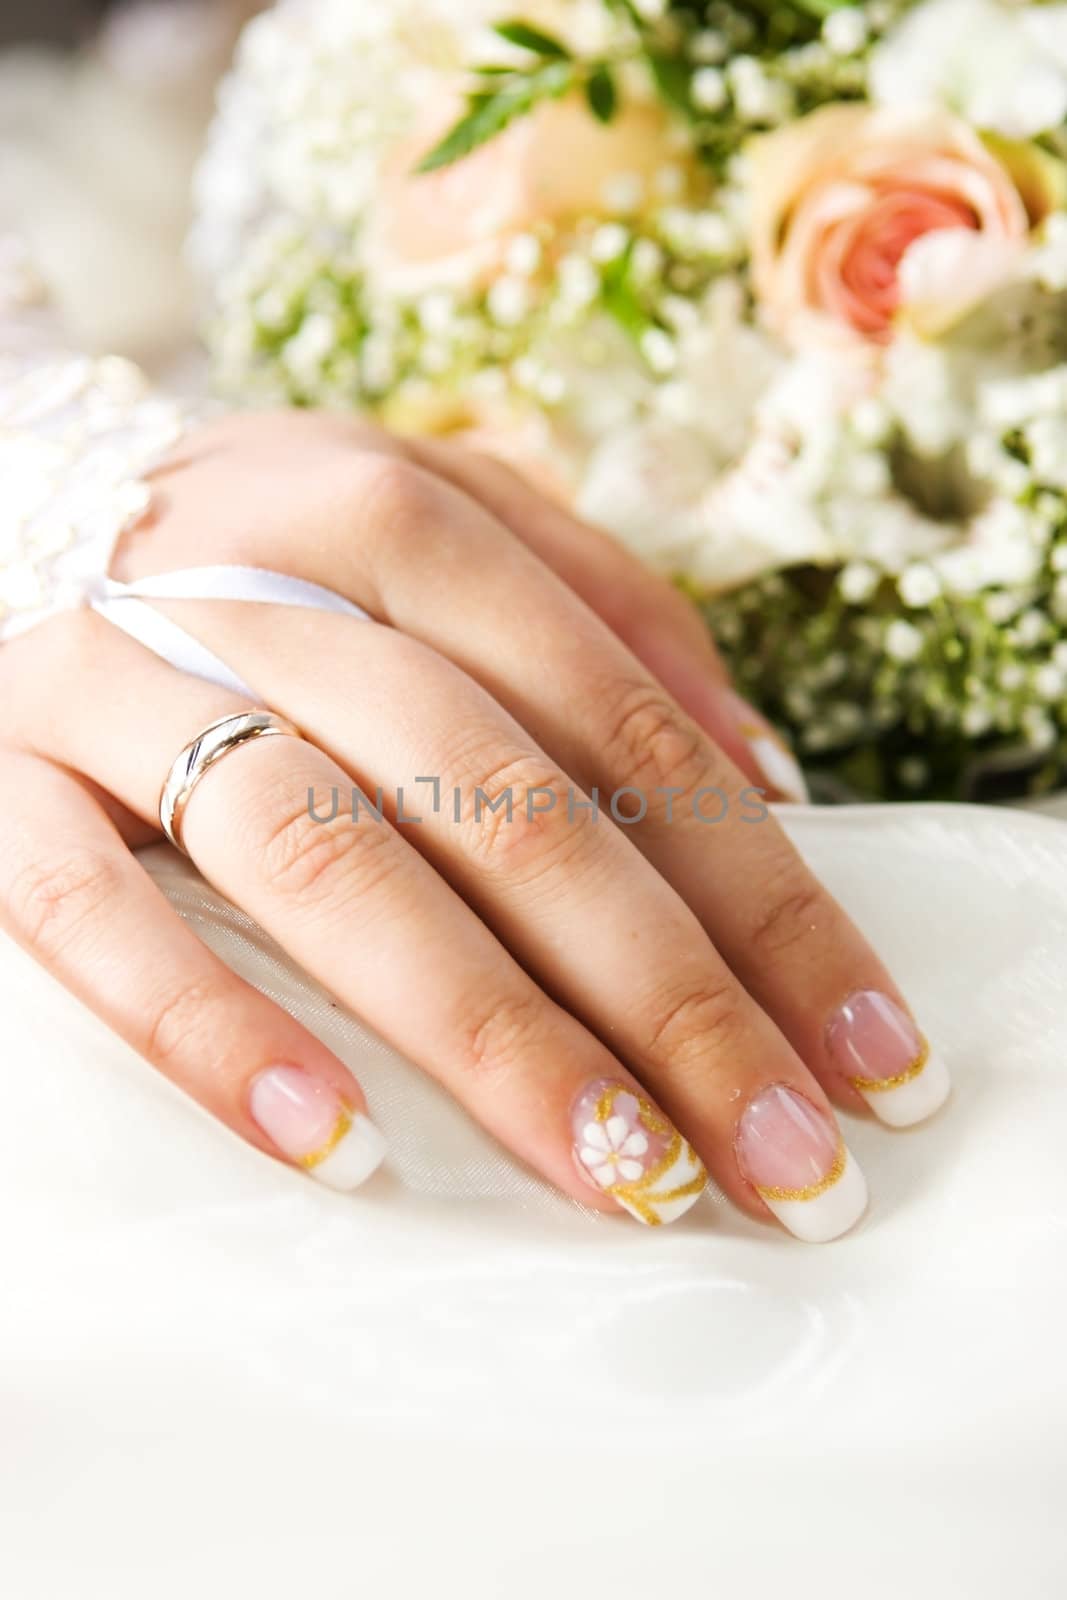 Bride's hand with golden ring and bouquet